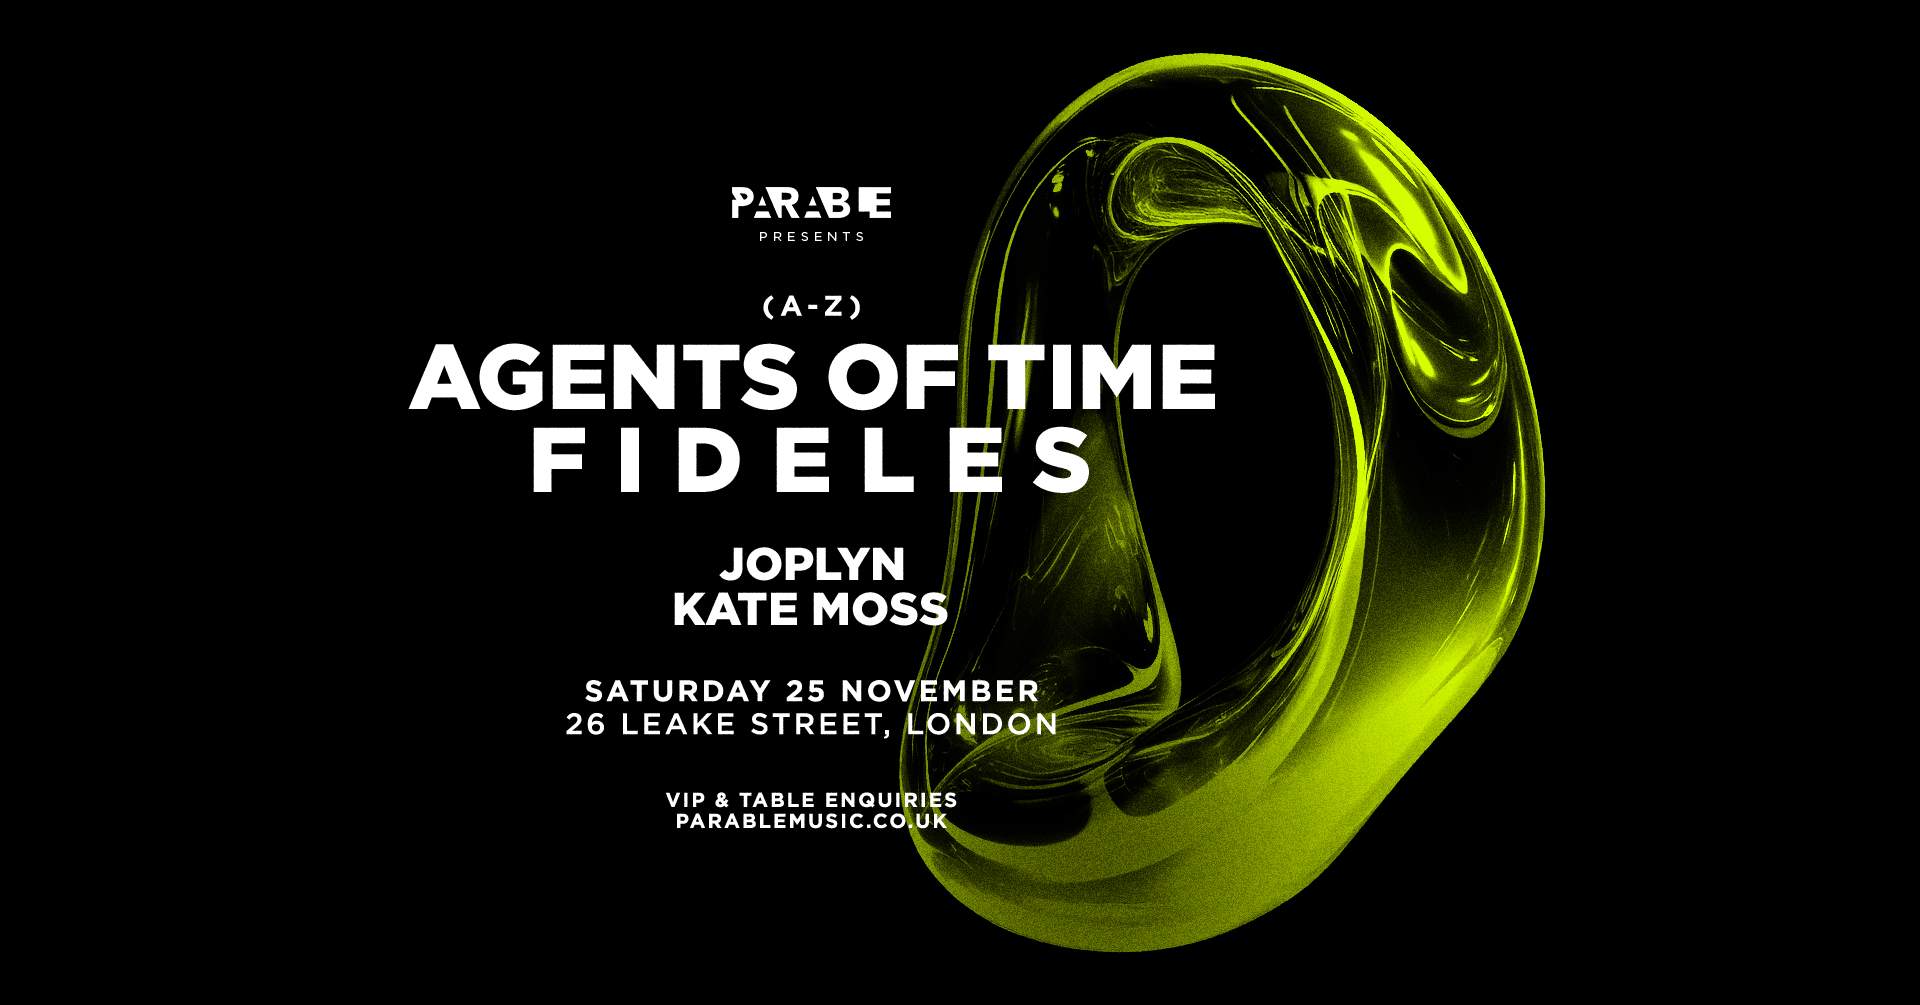 Parable presents: Agents of Time, Fideles, Joplyn - Página frontal